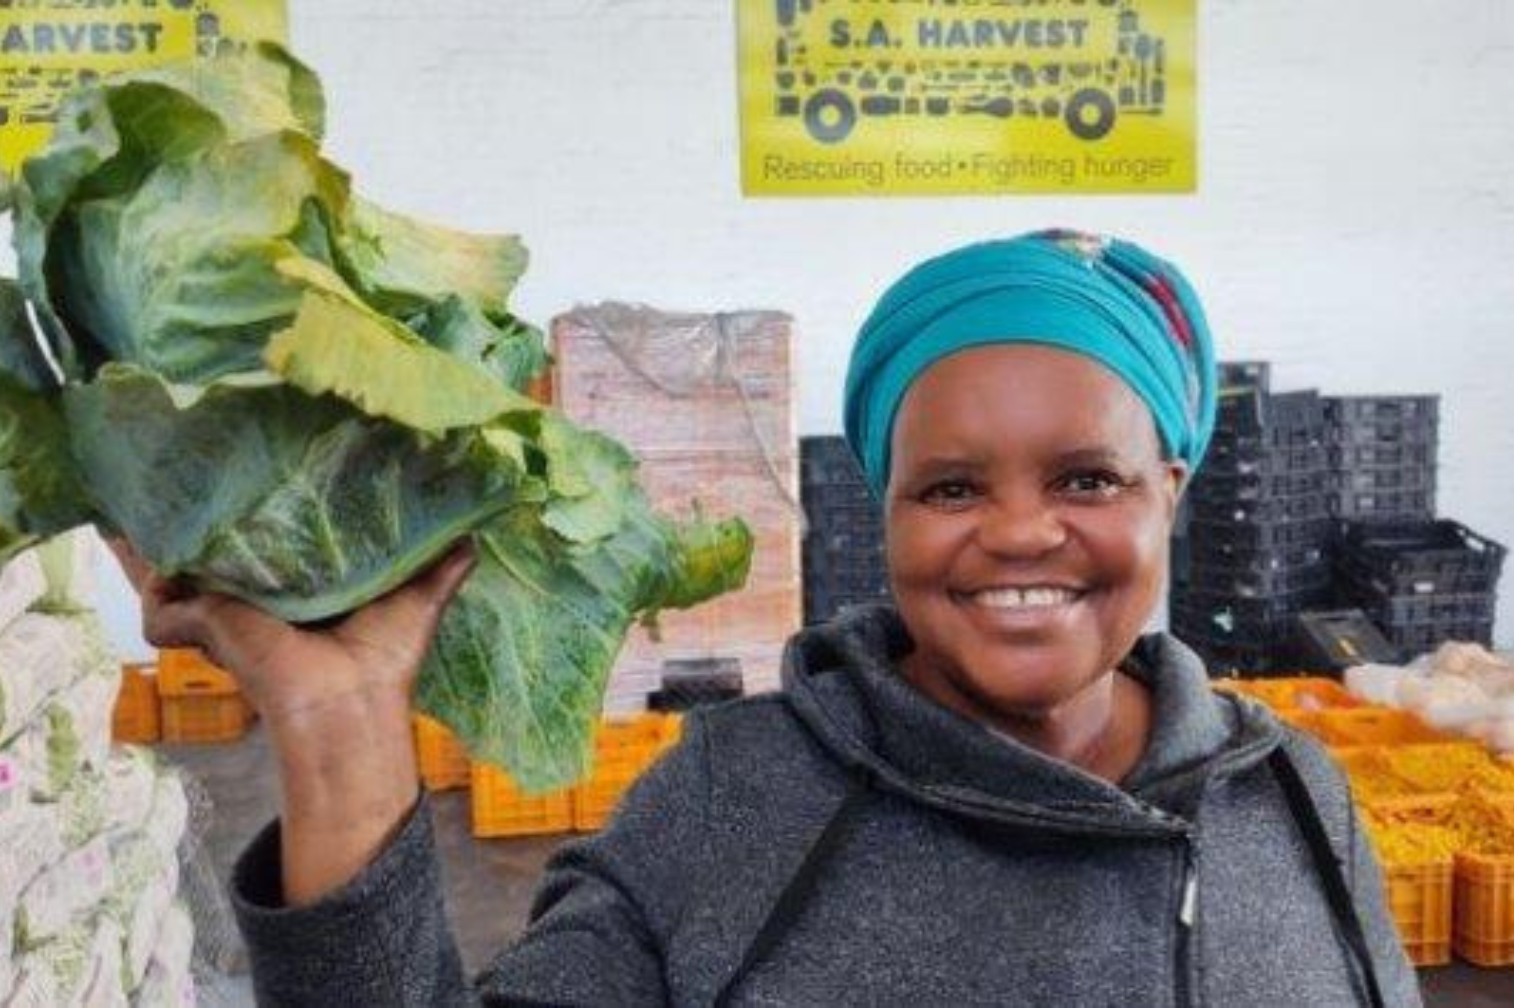 Smiling volunteer holds up a cabbage going to a family in need